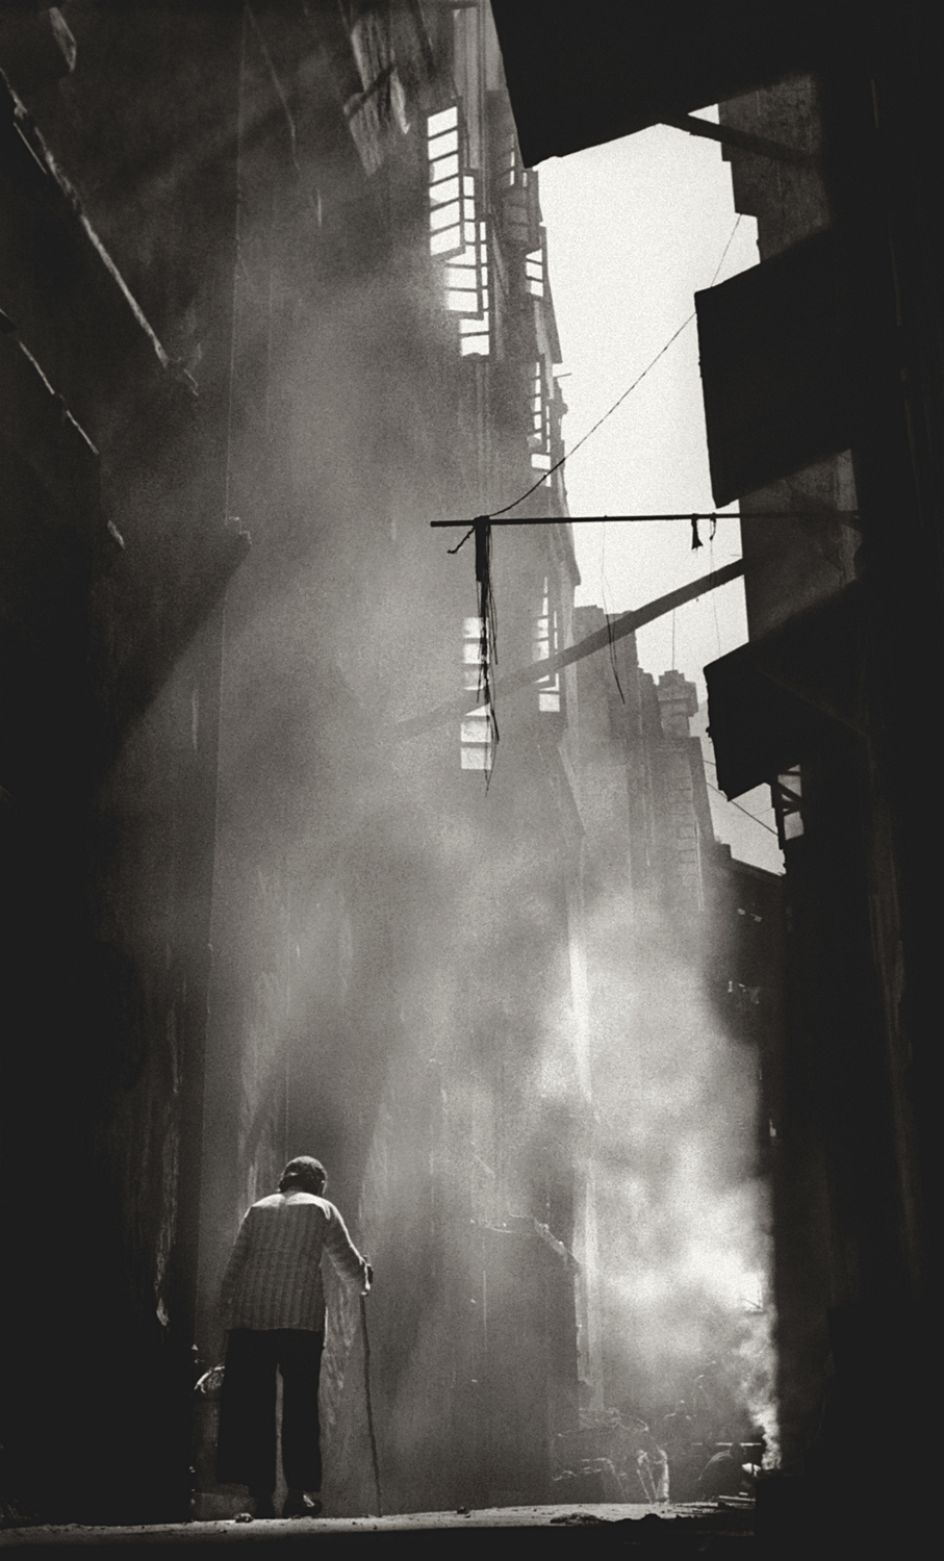 Fan Ho 'Mystic Alley(秘巷)' Hong Kong 1950s and 60s, courtesy of Blue Lotus Gallery